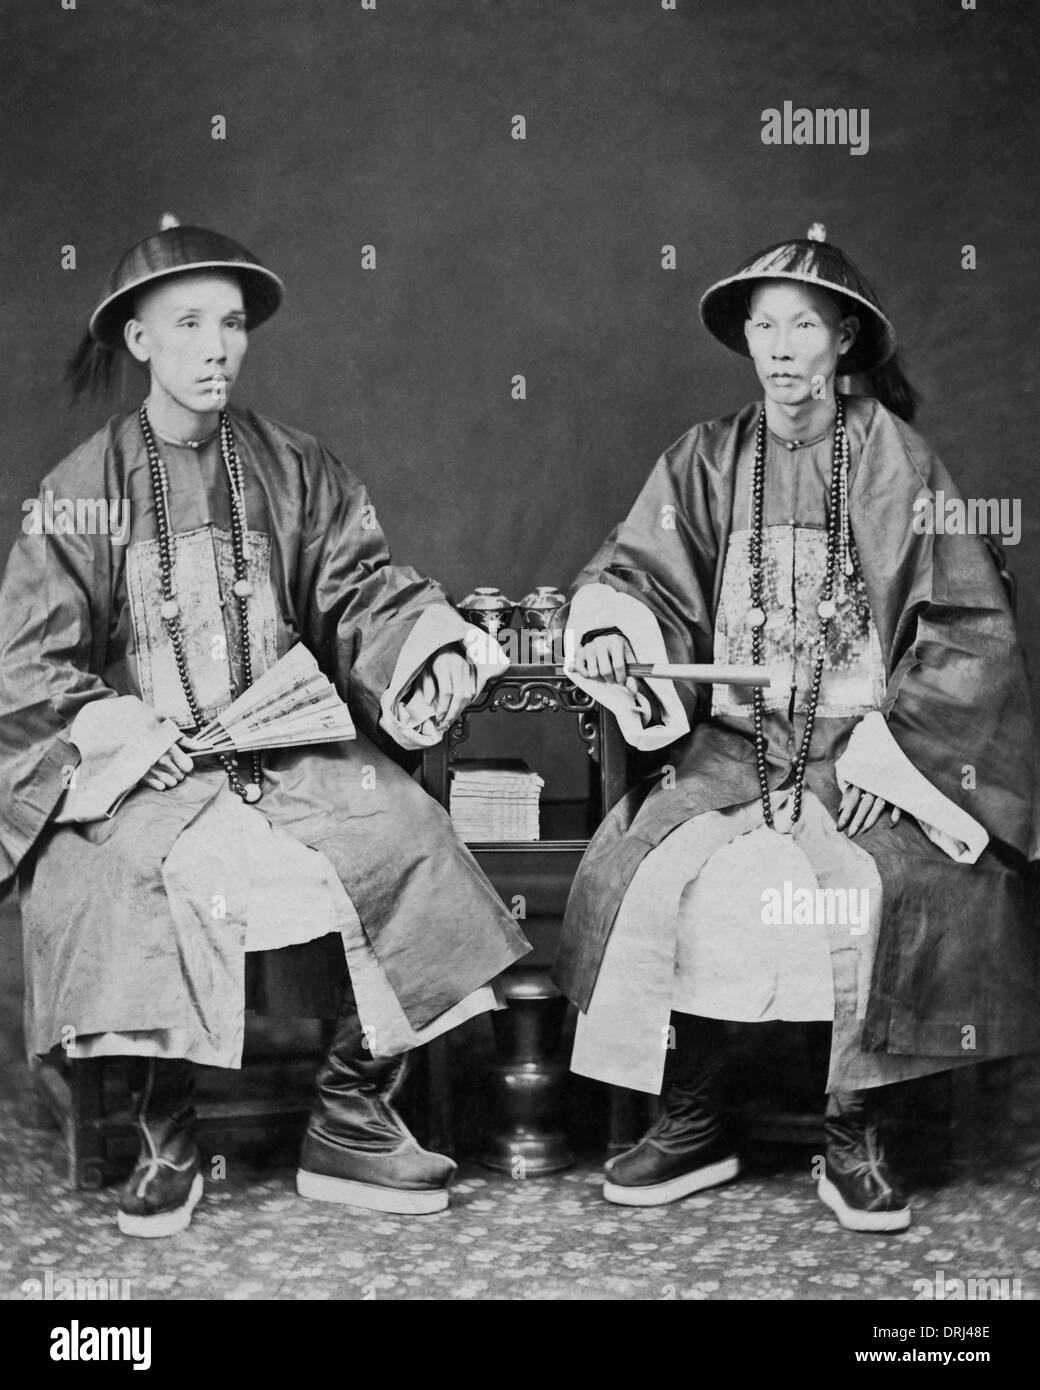 Chinese men seated Black and White Stock Photos & Images - Alamy